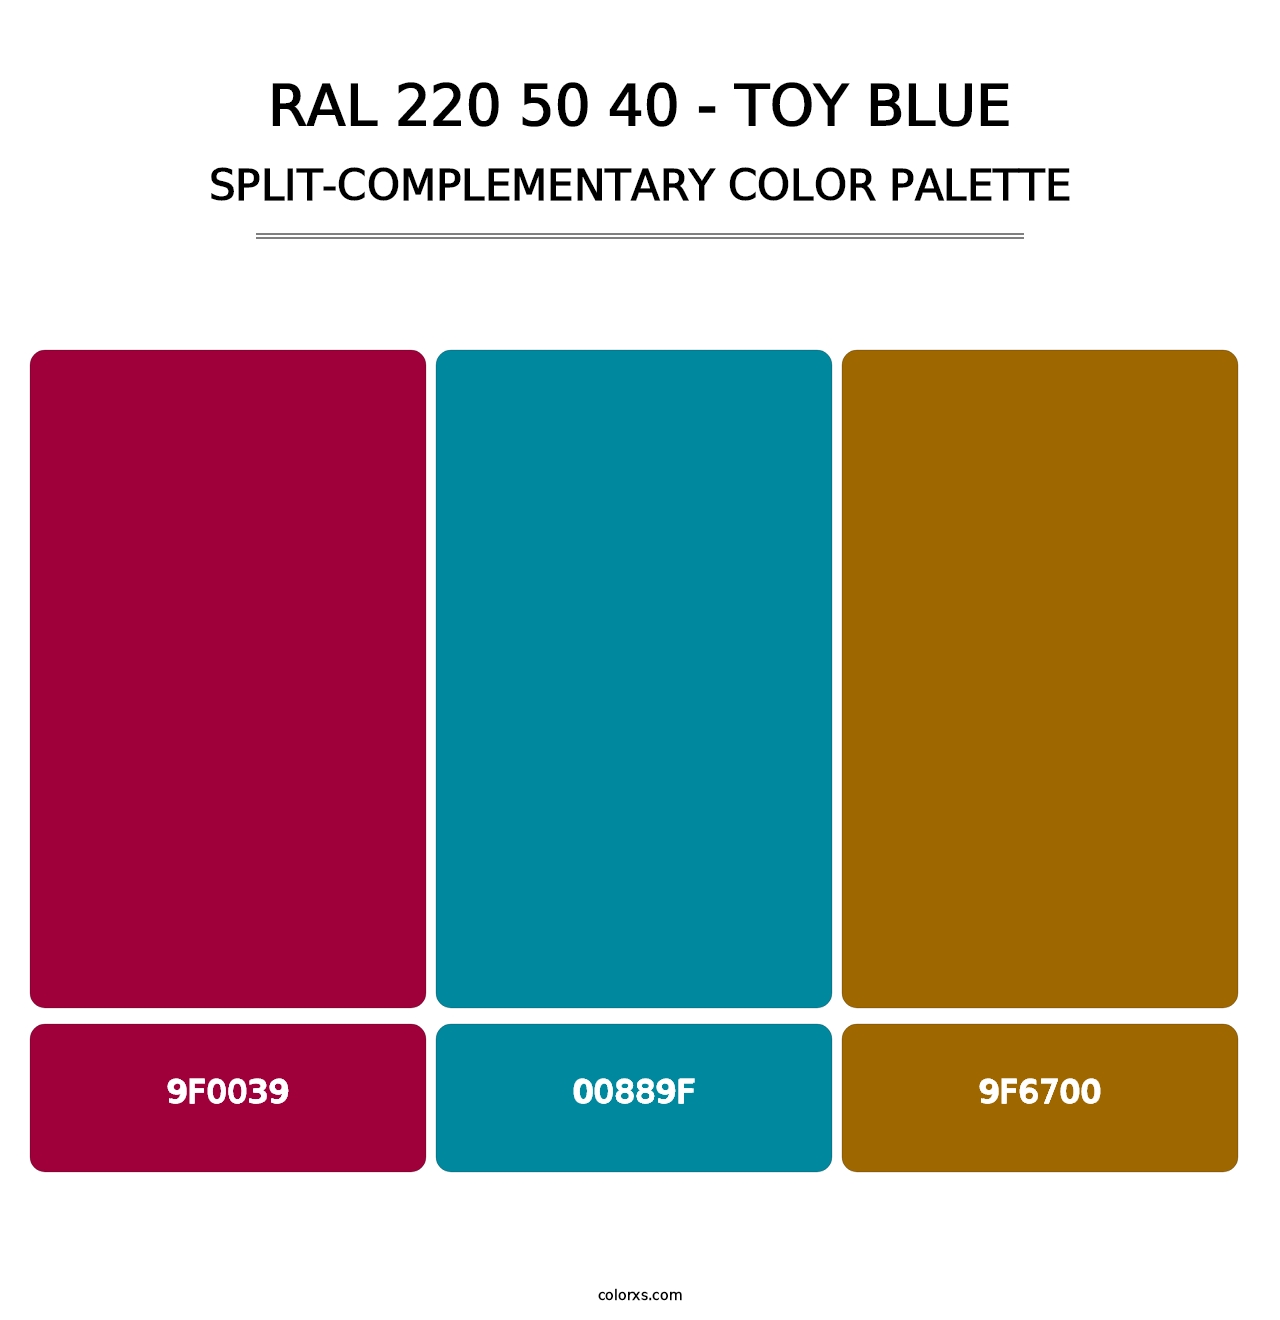 RAL 220 50 40 - Toy Blue - Split-Complementary Color Palette